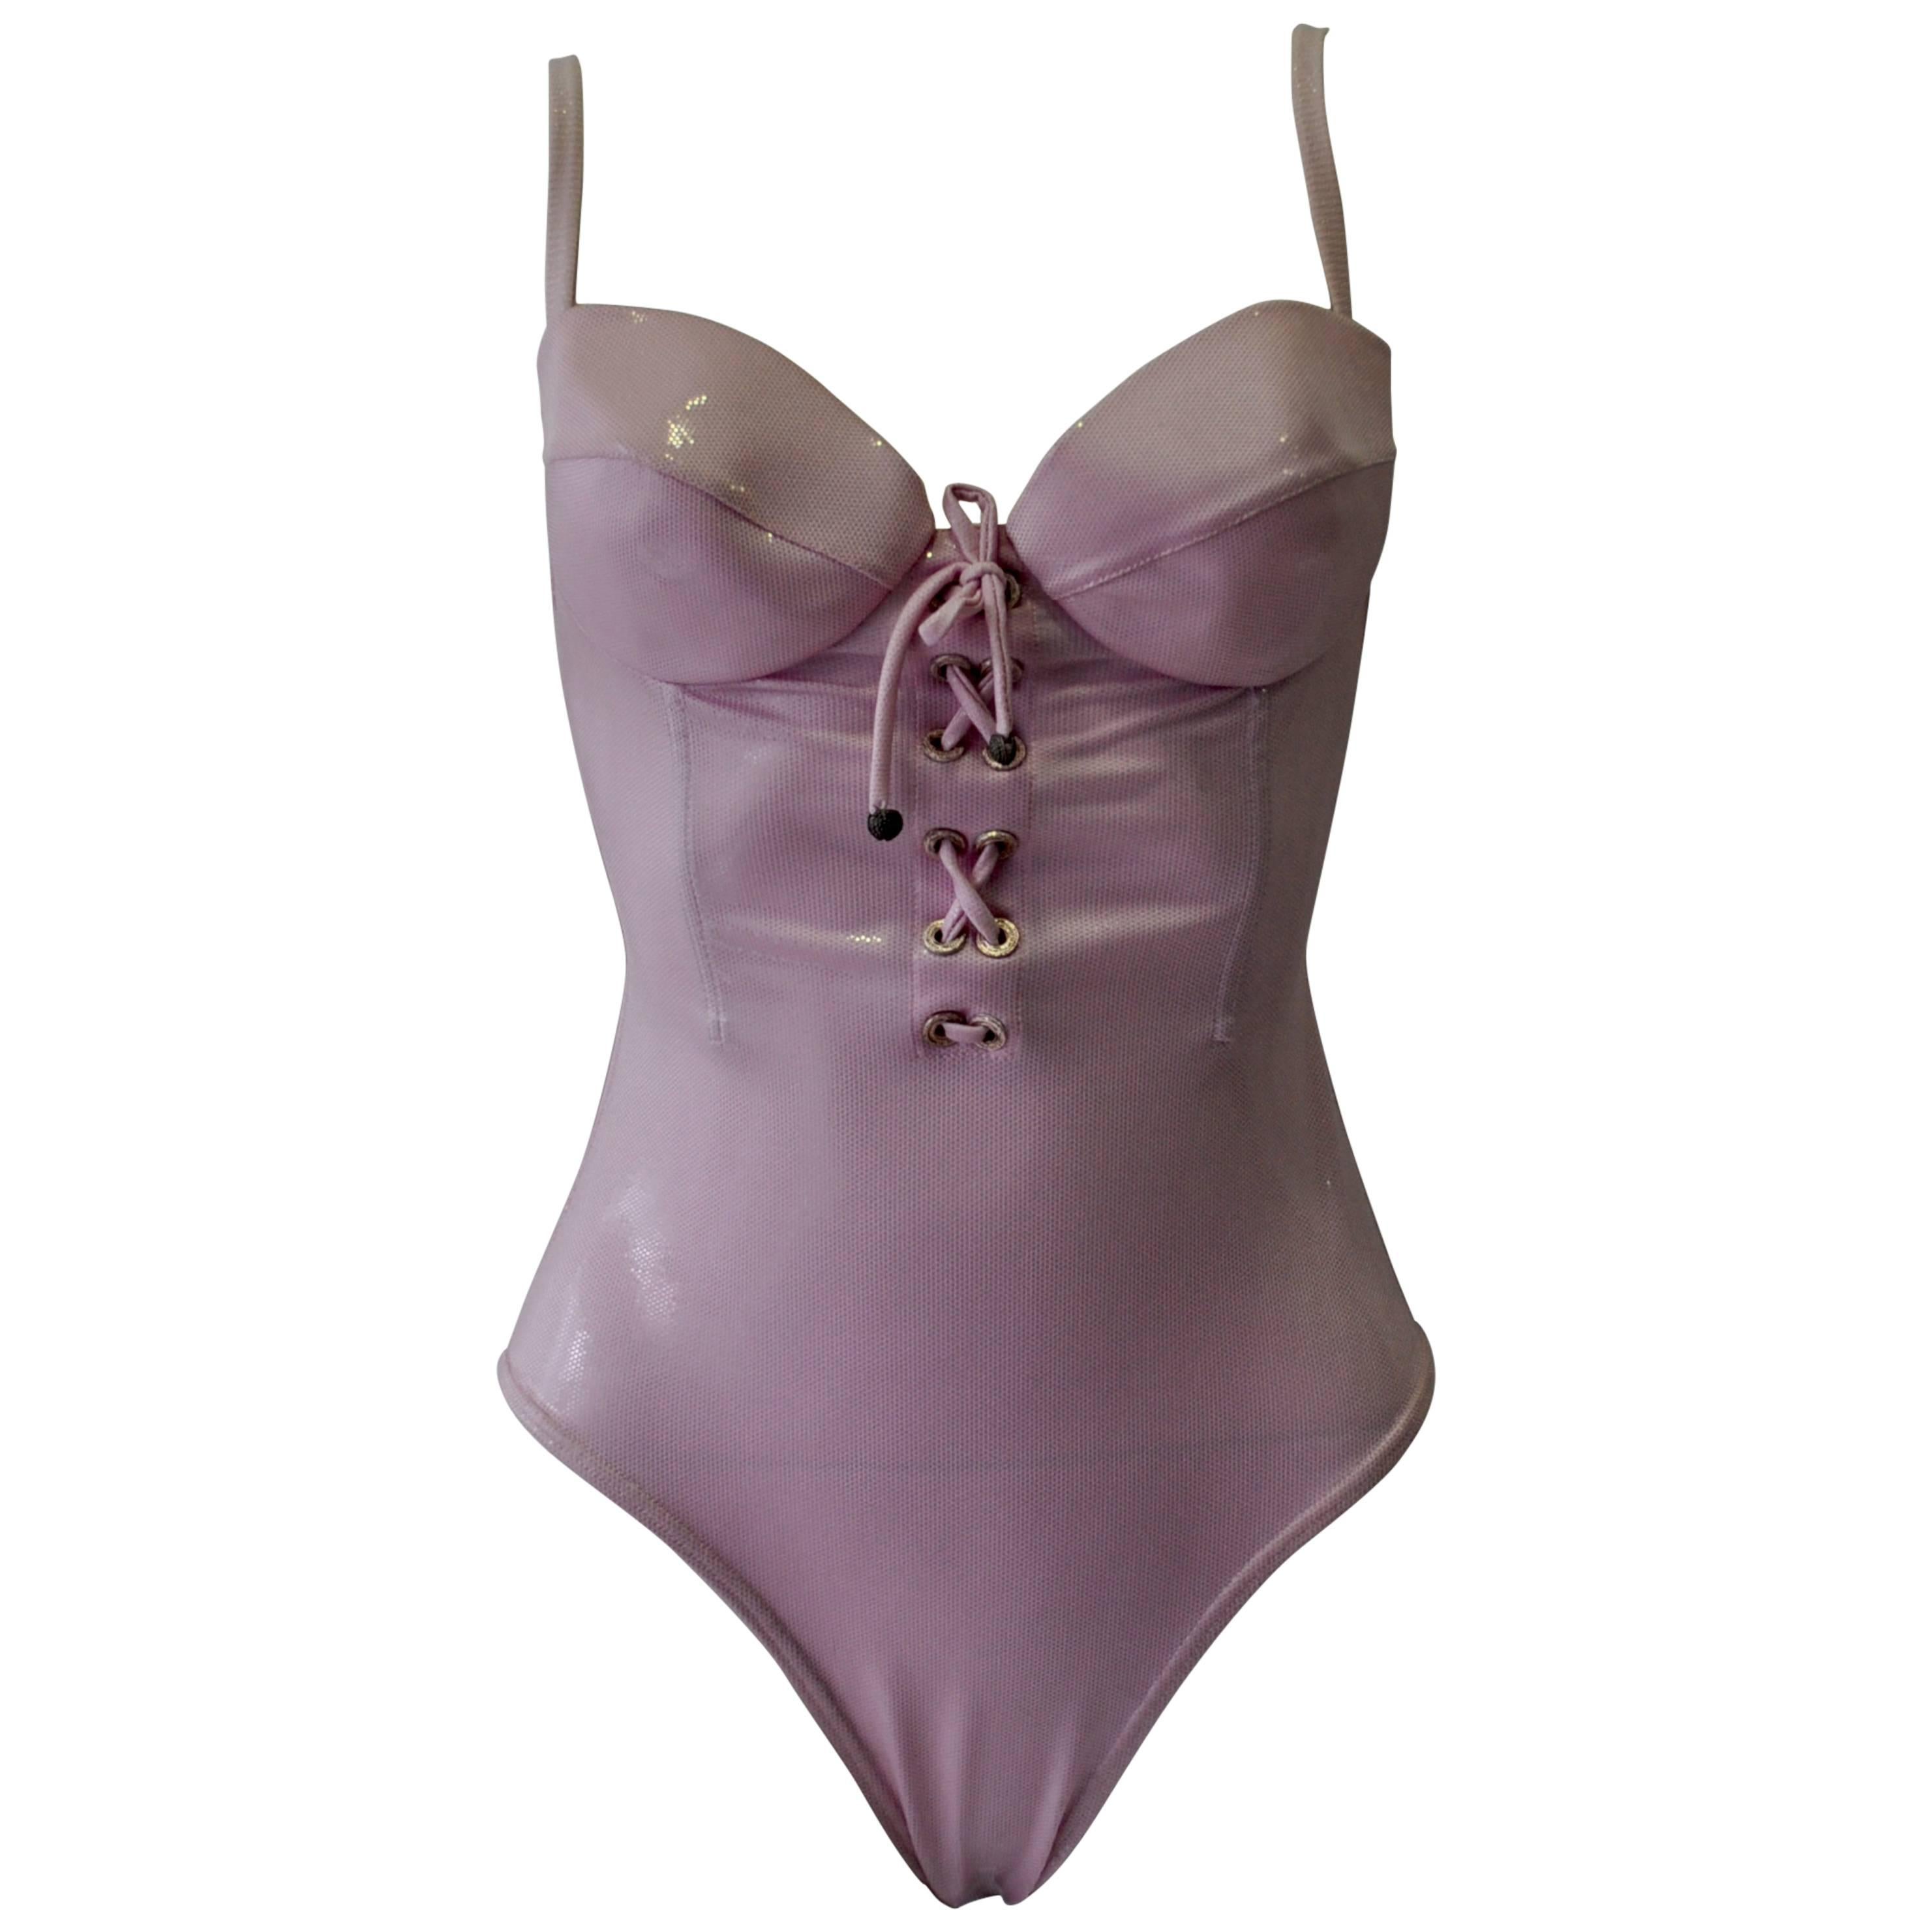 Unique Gianni Versace Istante Pink Shimmery Lace-Up Bustier Swimsuit